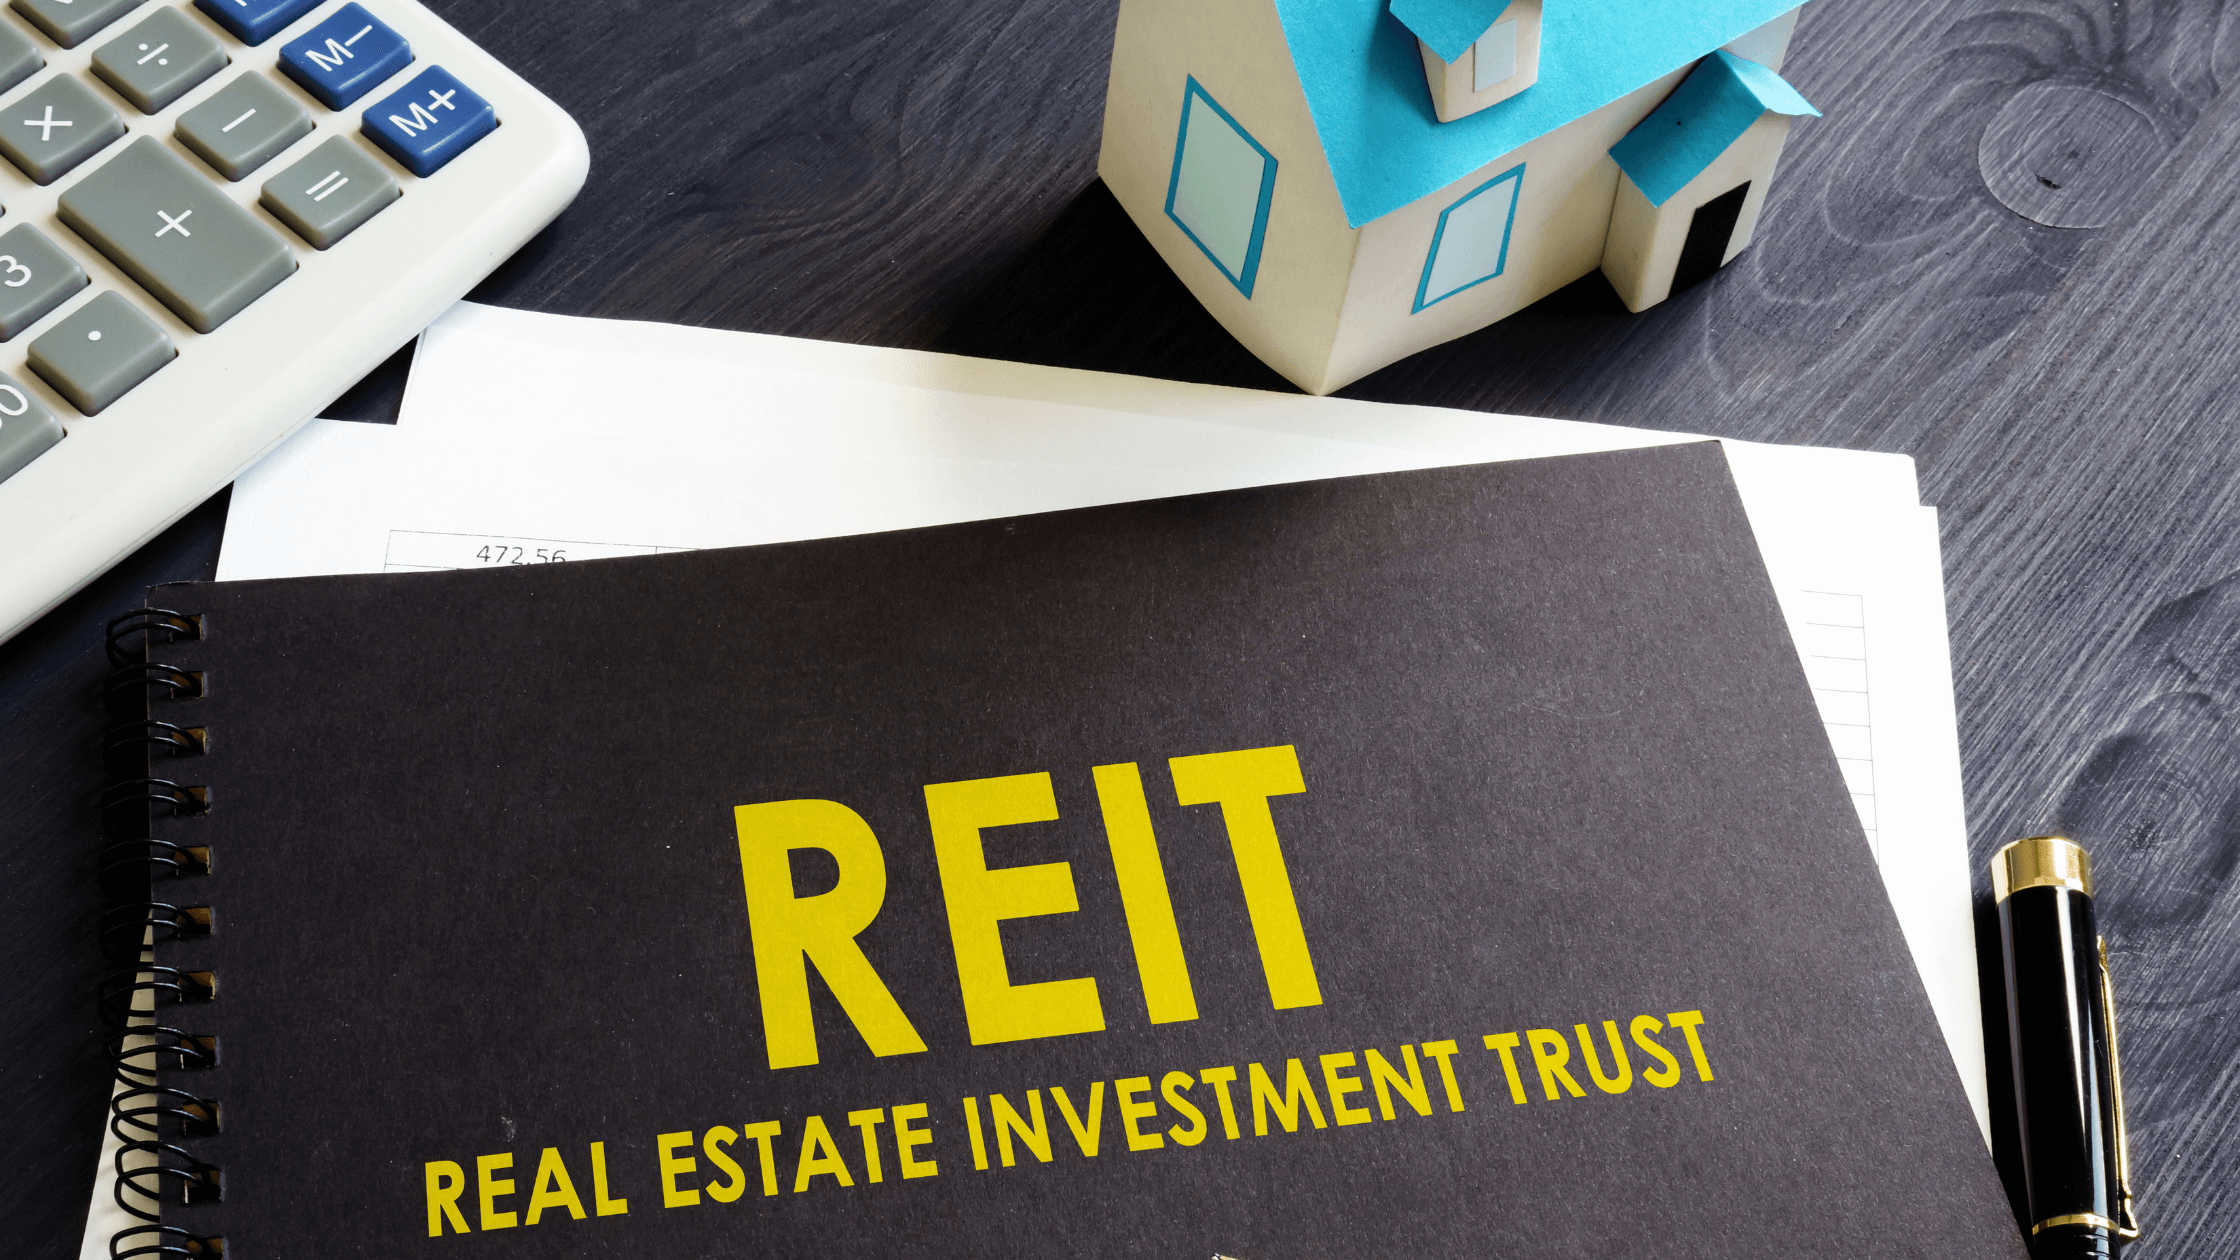 3 S-REITs Yielding Over 6% That Dividend Lovers Can Buy Now